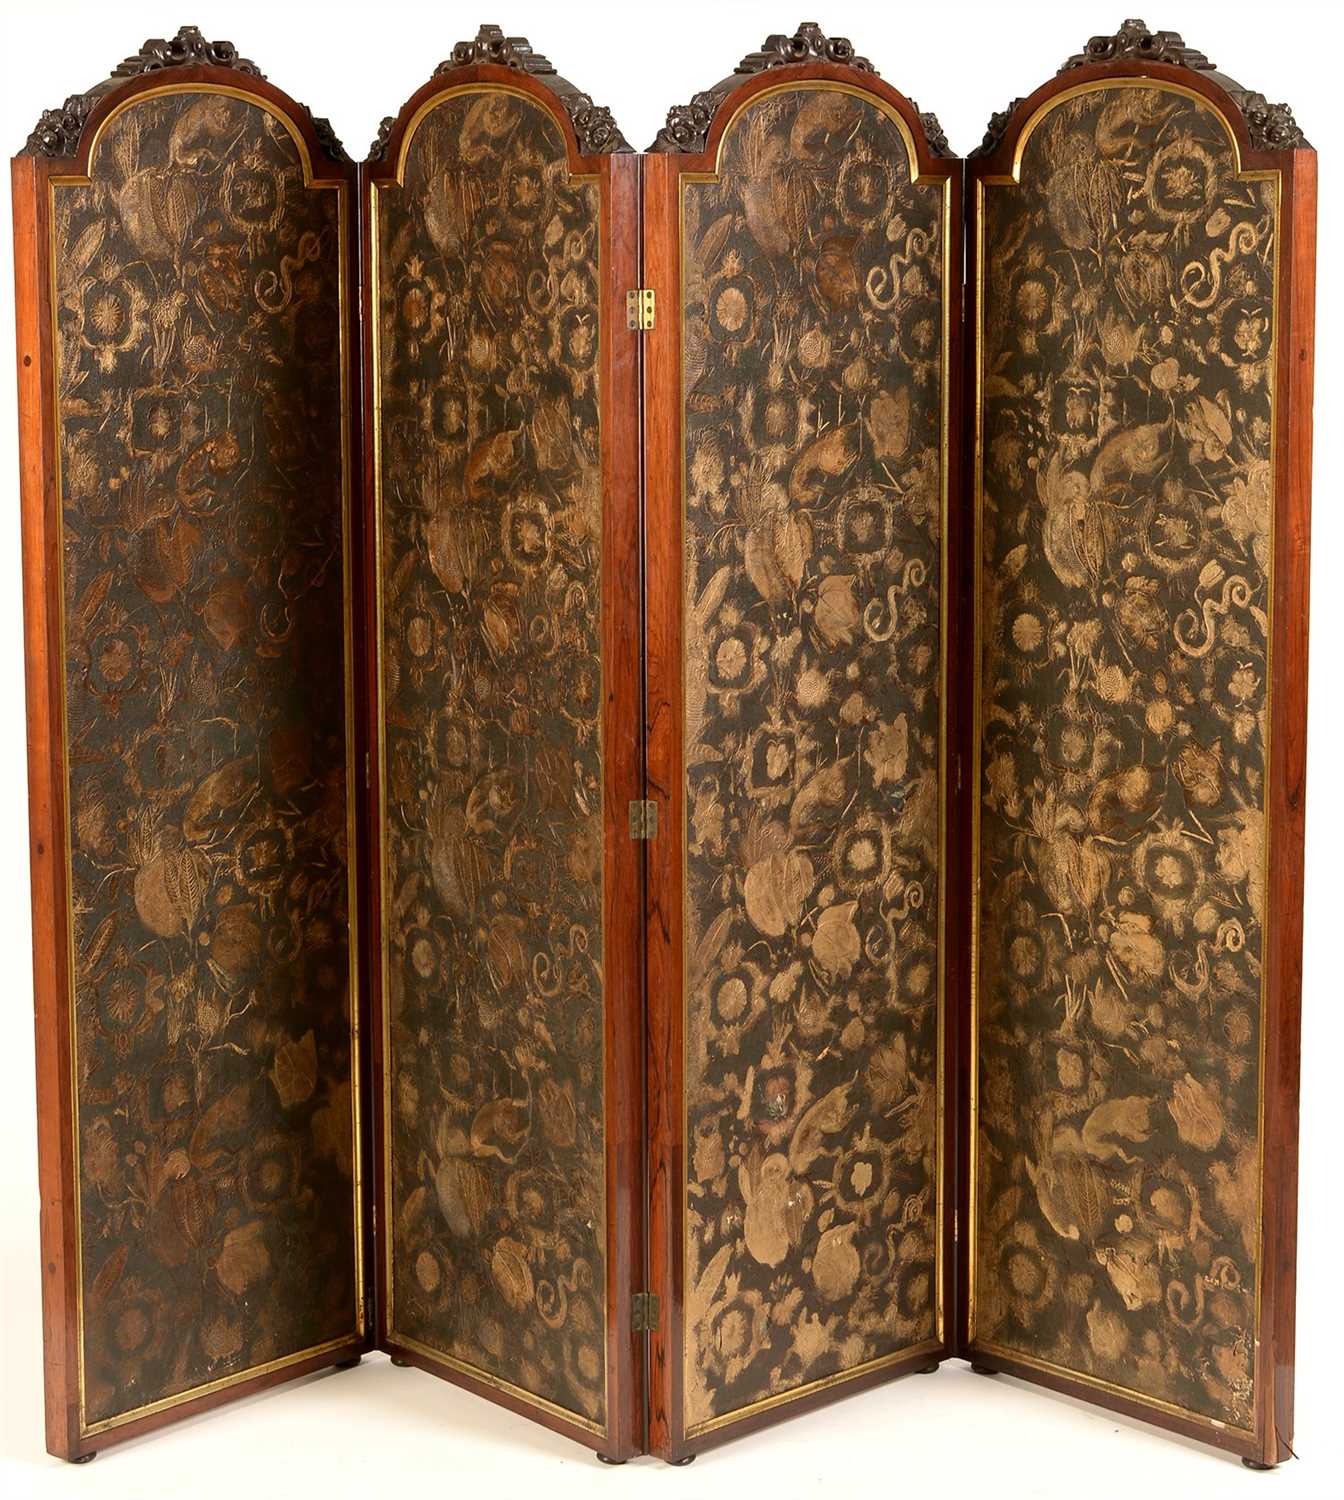 Lot 828 - A Victorian carved rosewood four-fold screen.